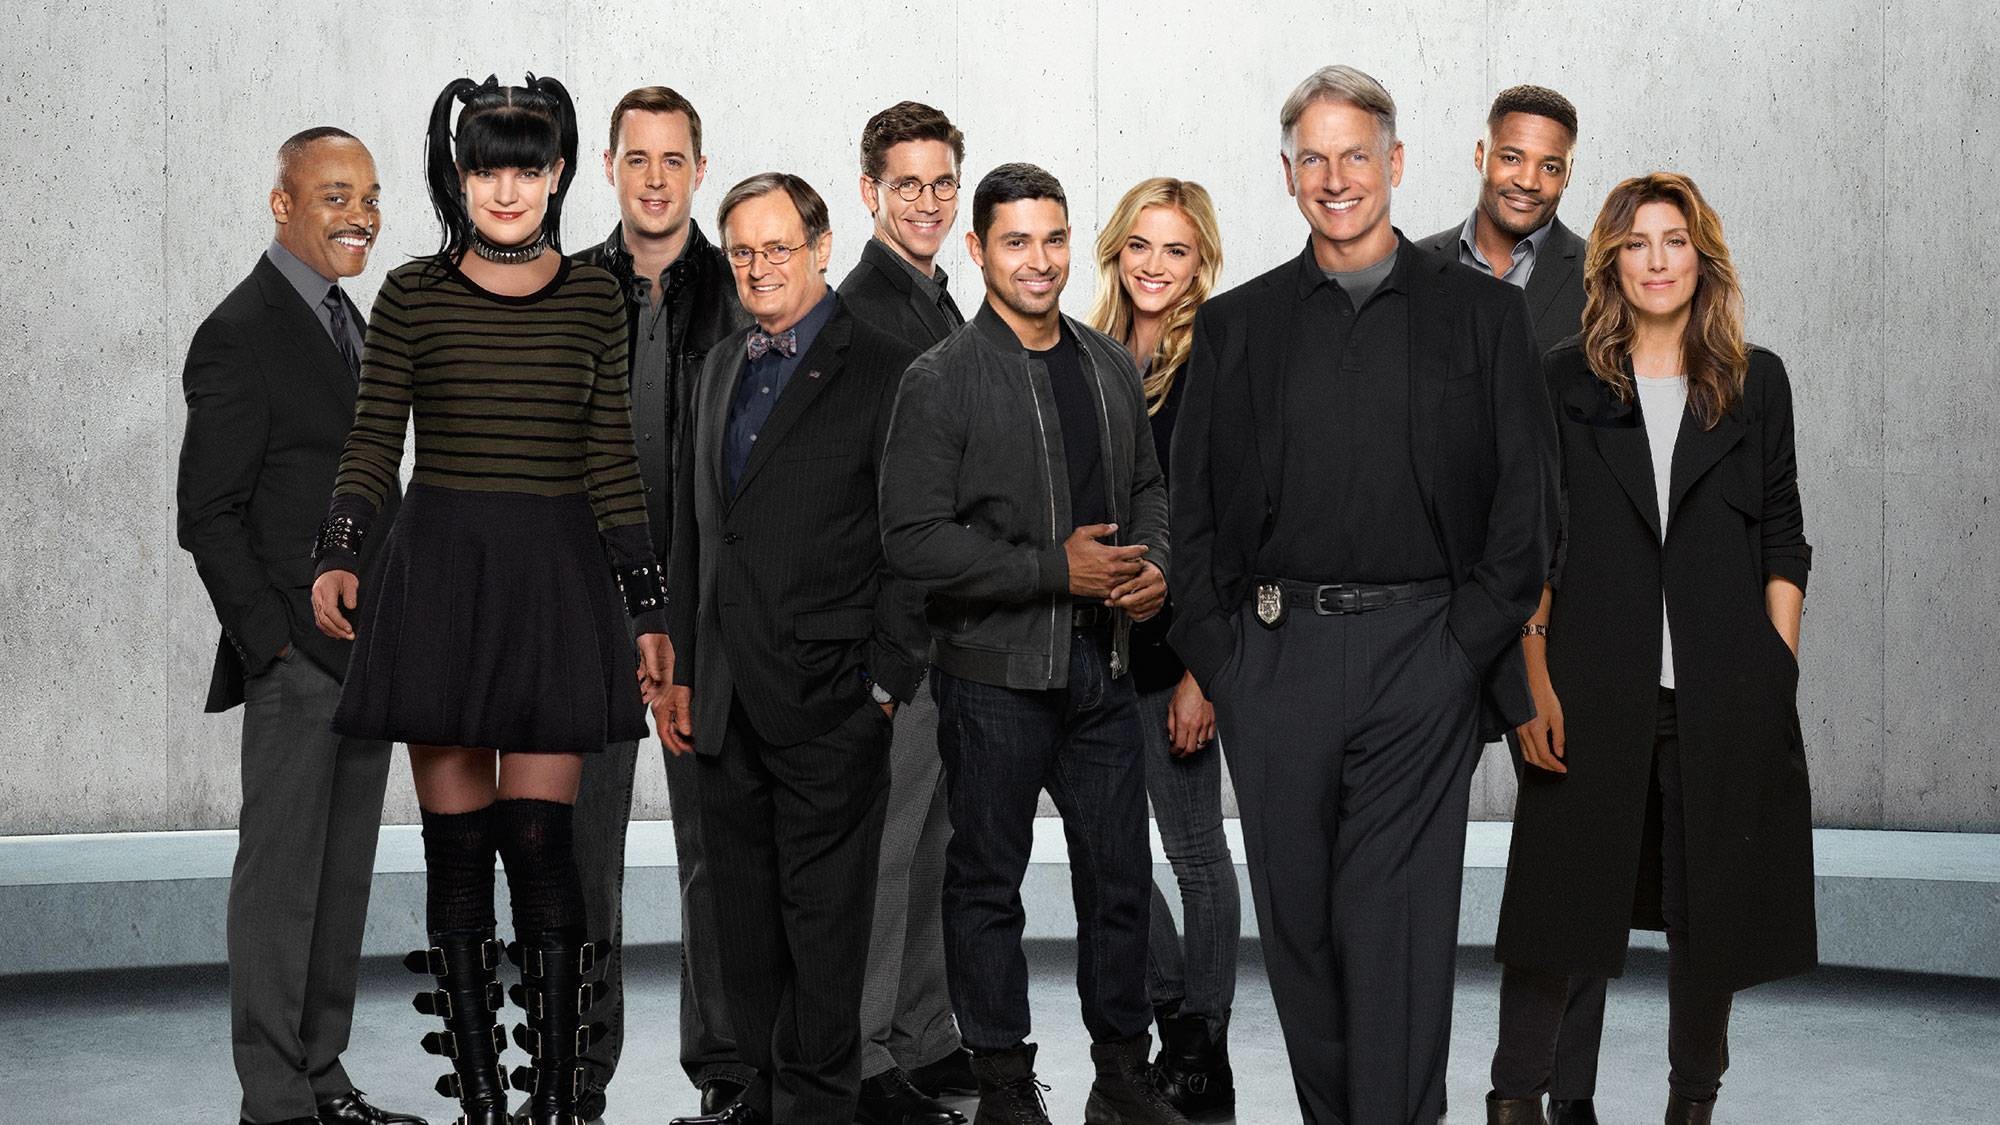 Download Ncis wallpapers for mobile phone free Ncis HD pictures